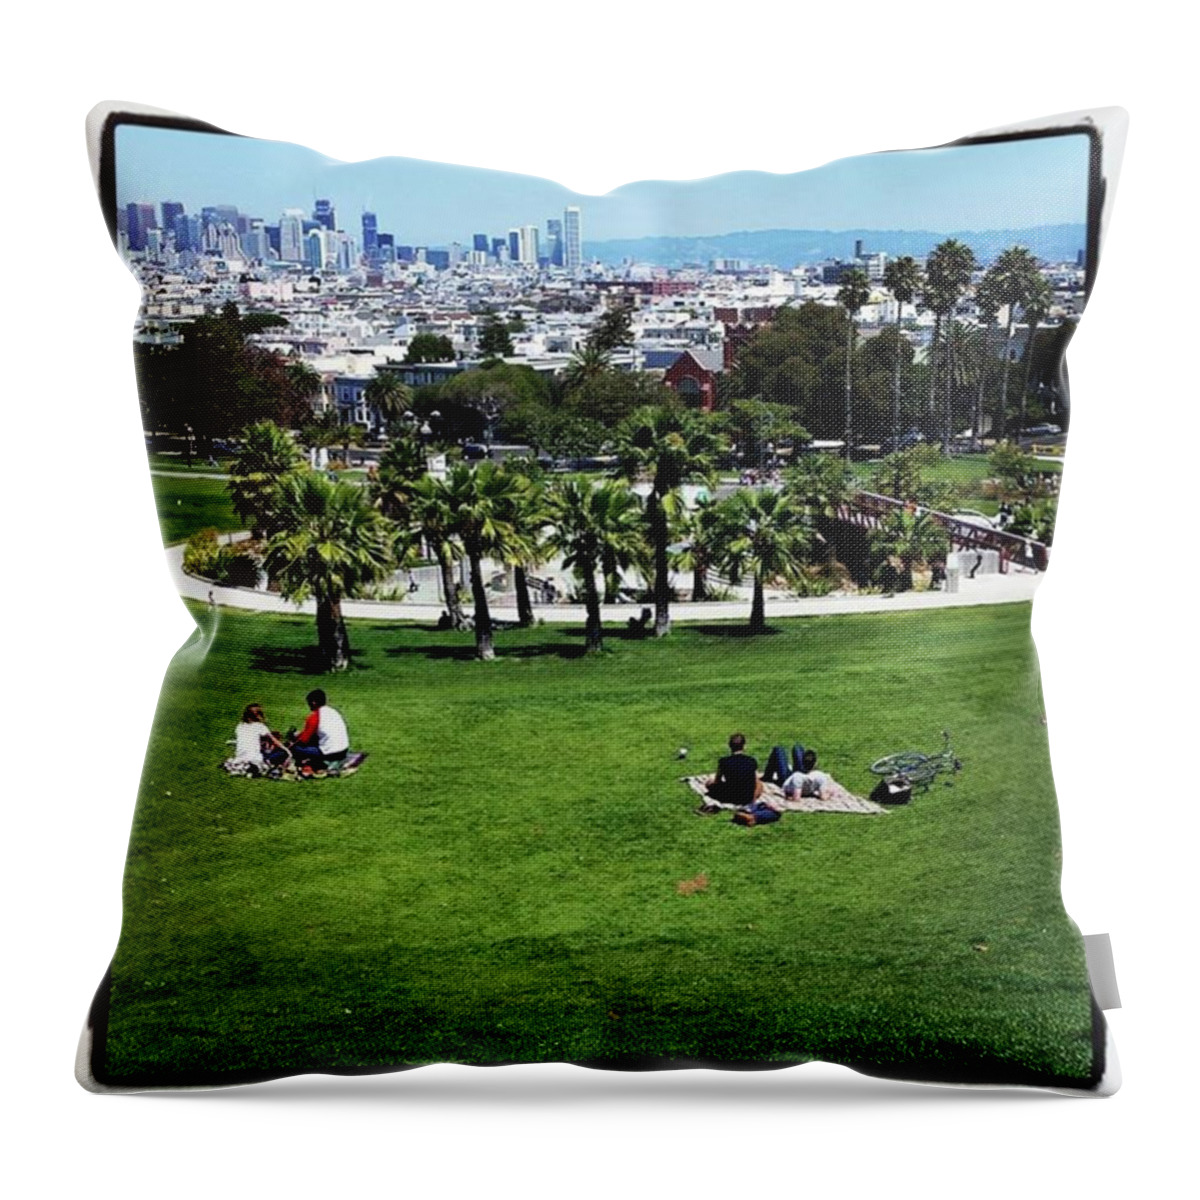 Doloresgaybeach Throw Pillow featuring the photograph Quiet At #doloresgaybeach by Mr Photojimsf